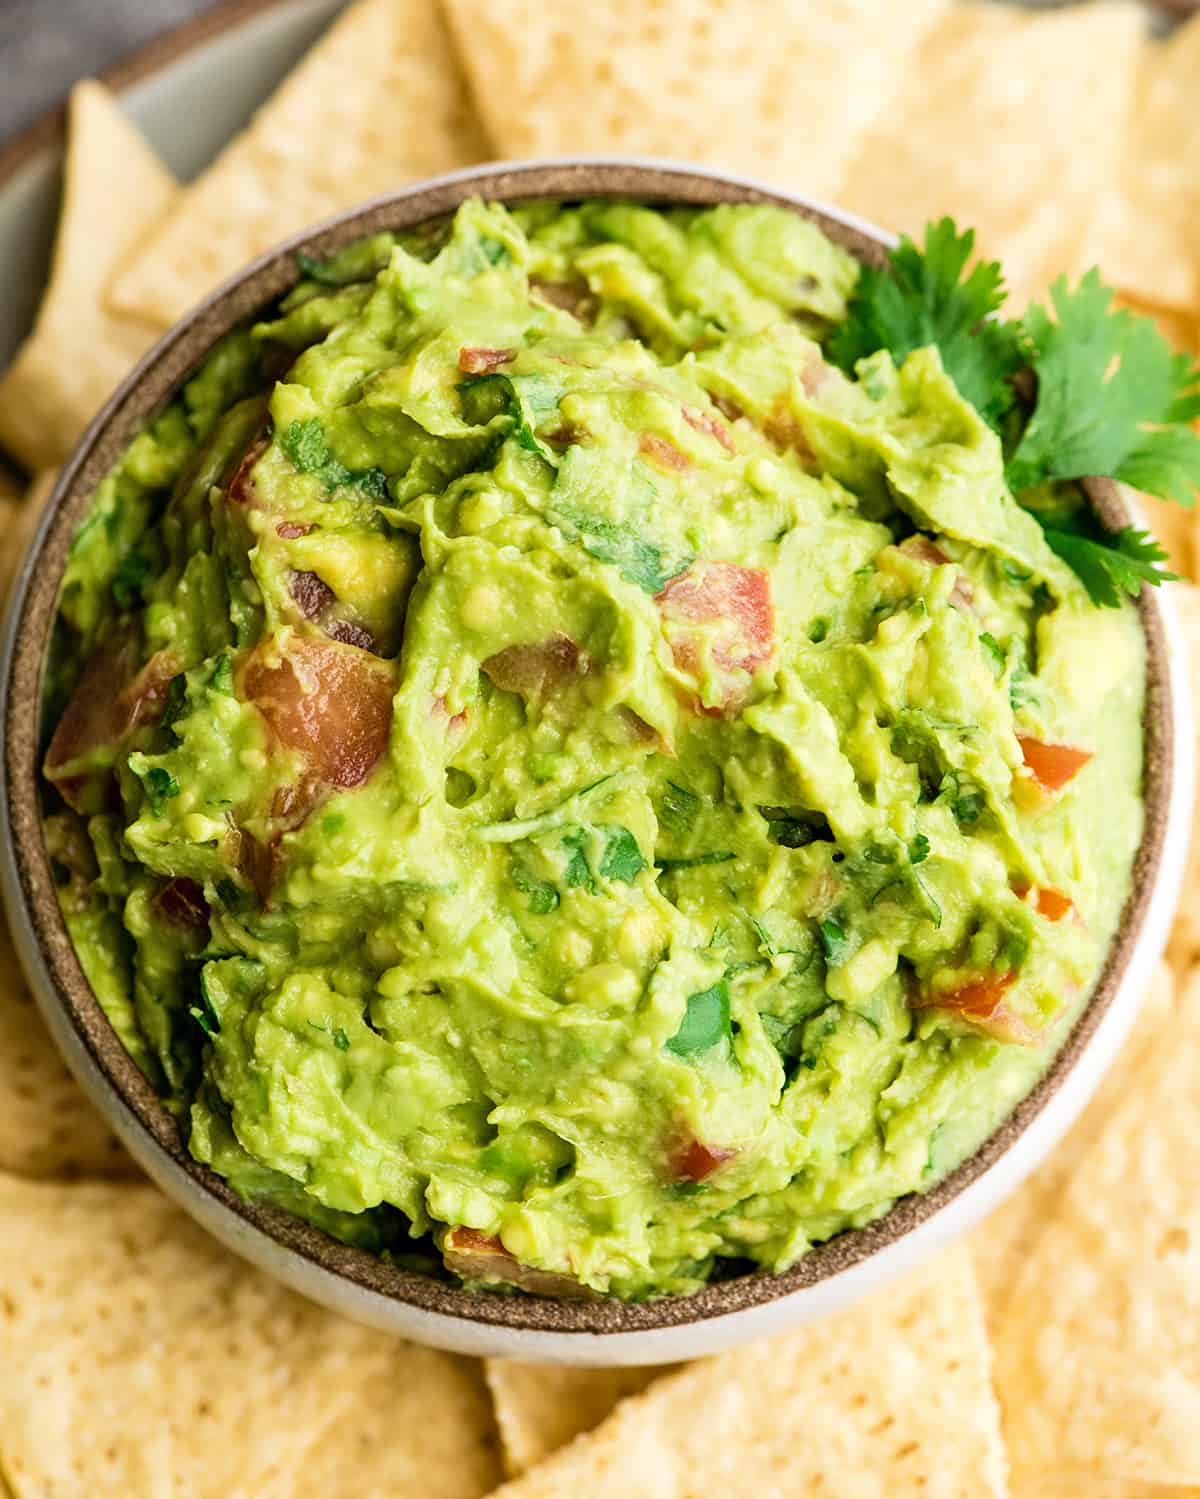 Overhead view of easy guacamole recipe in a bowl surrounded by chips